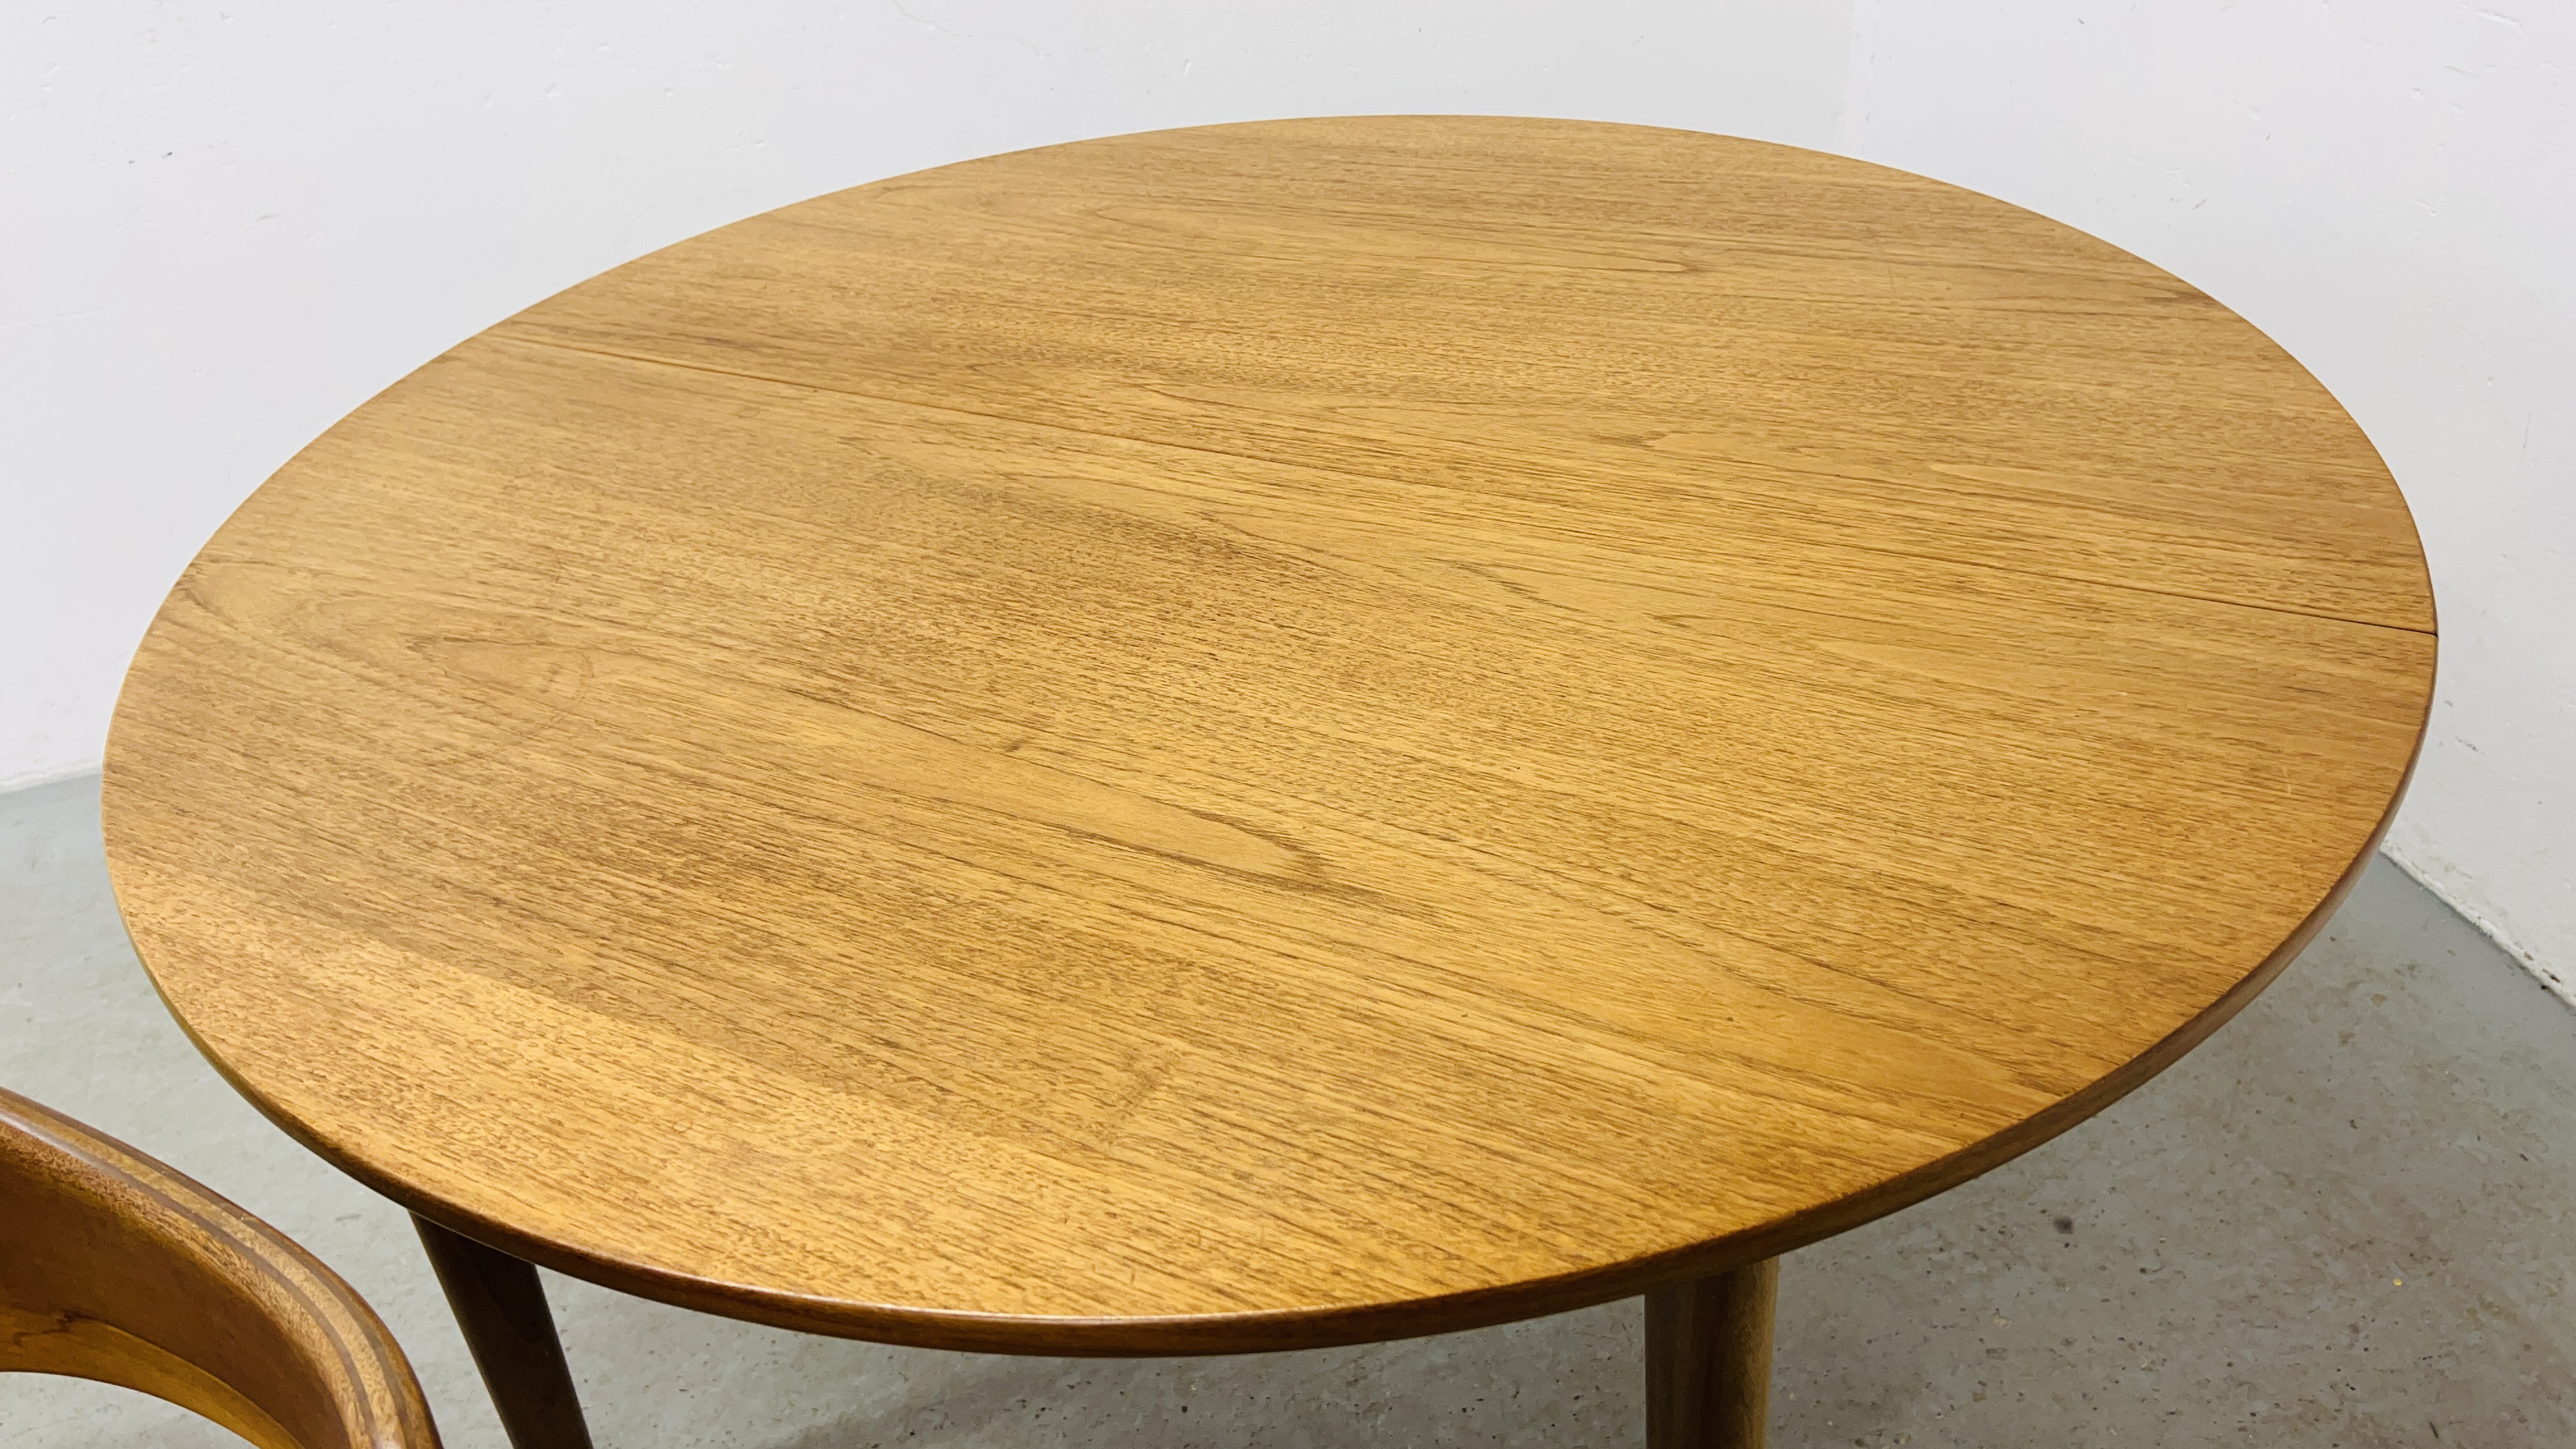 DANISH MID-CENTURY TEAK EXTENDING CIRCULAR DINING TABLE (2 LEAVES) ALONG WITH A SET OF SIX DANISH - Image 16 of 23